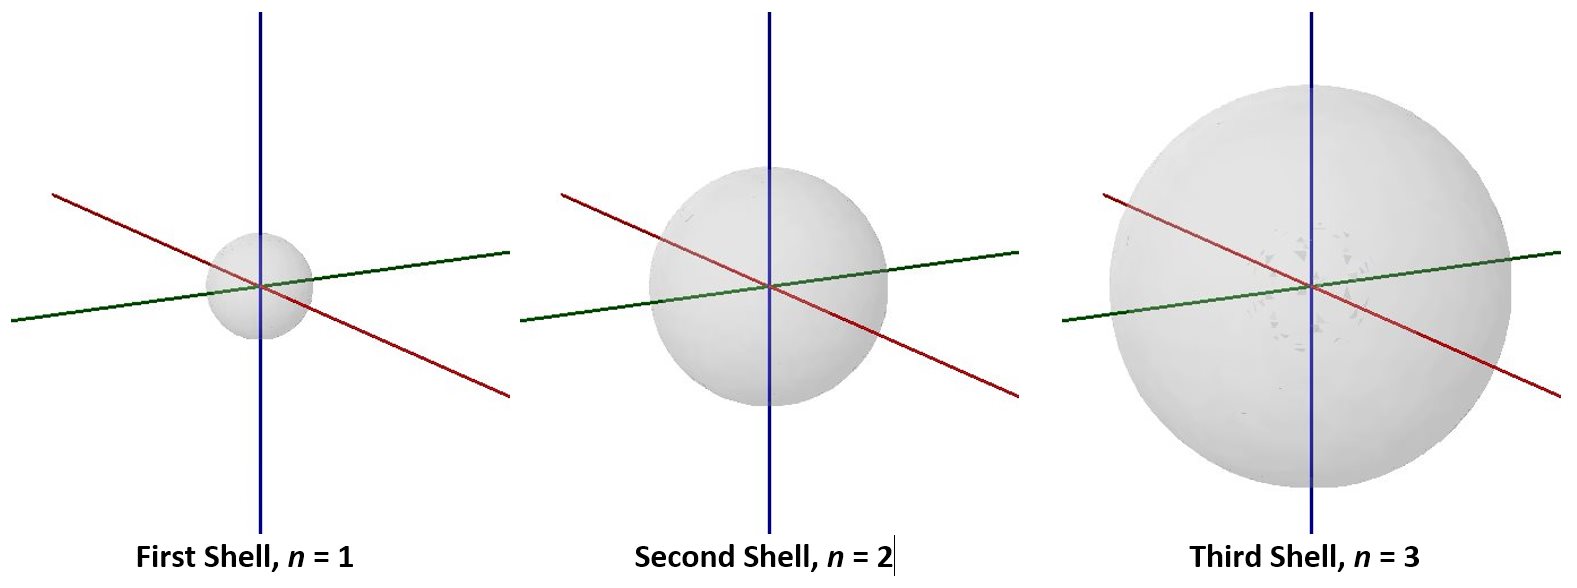 Diagram of boundary shells showing the first, smallest boundary shell, n=1; the second medium sized shell, n=2; and the third largest shell, n=3. Each shell is shown with x-, y-, and z-axis within them.